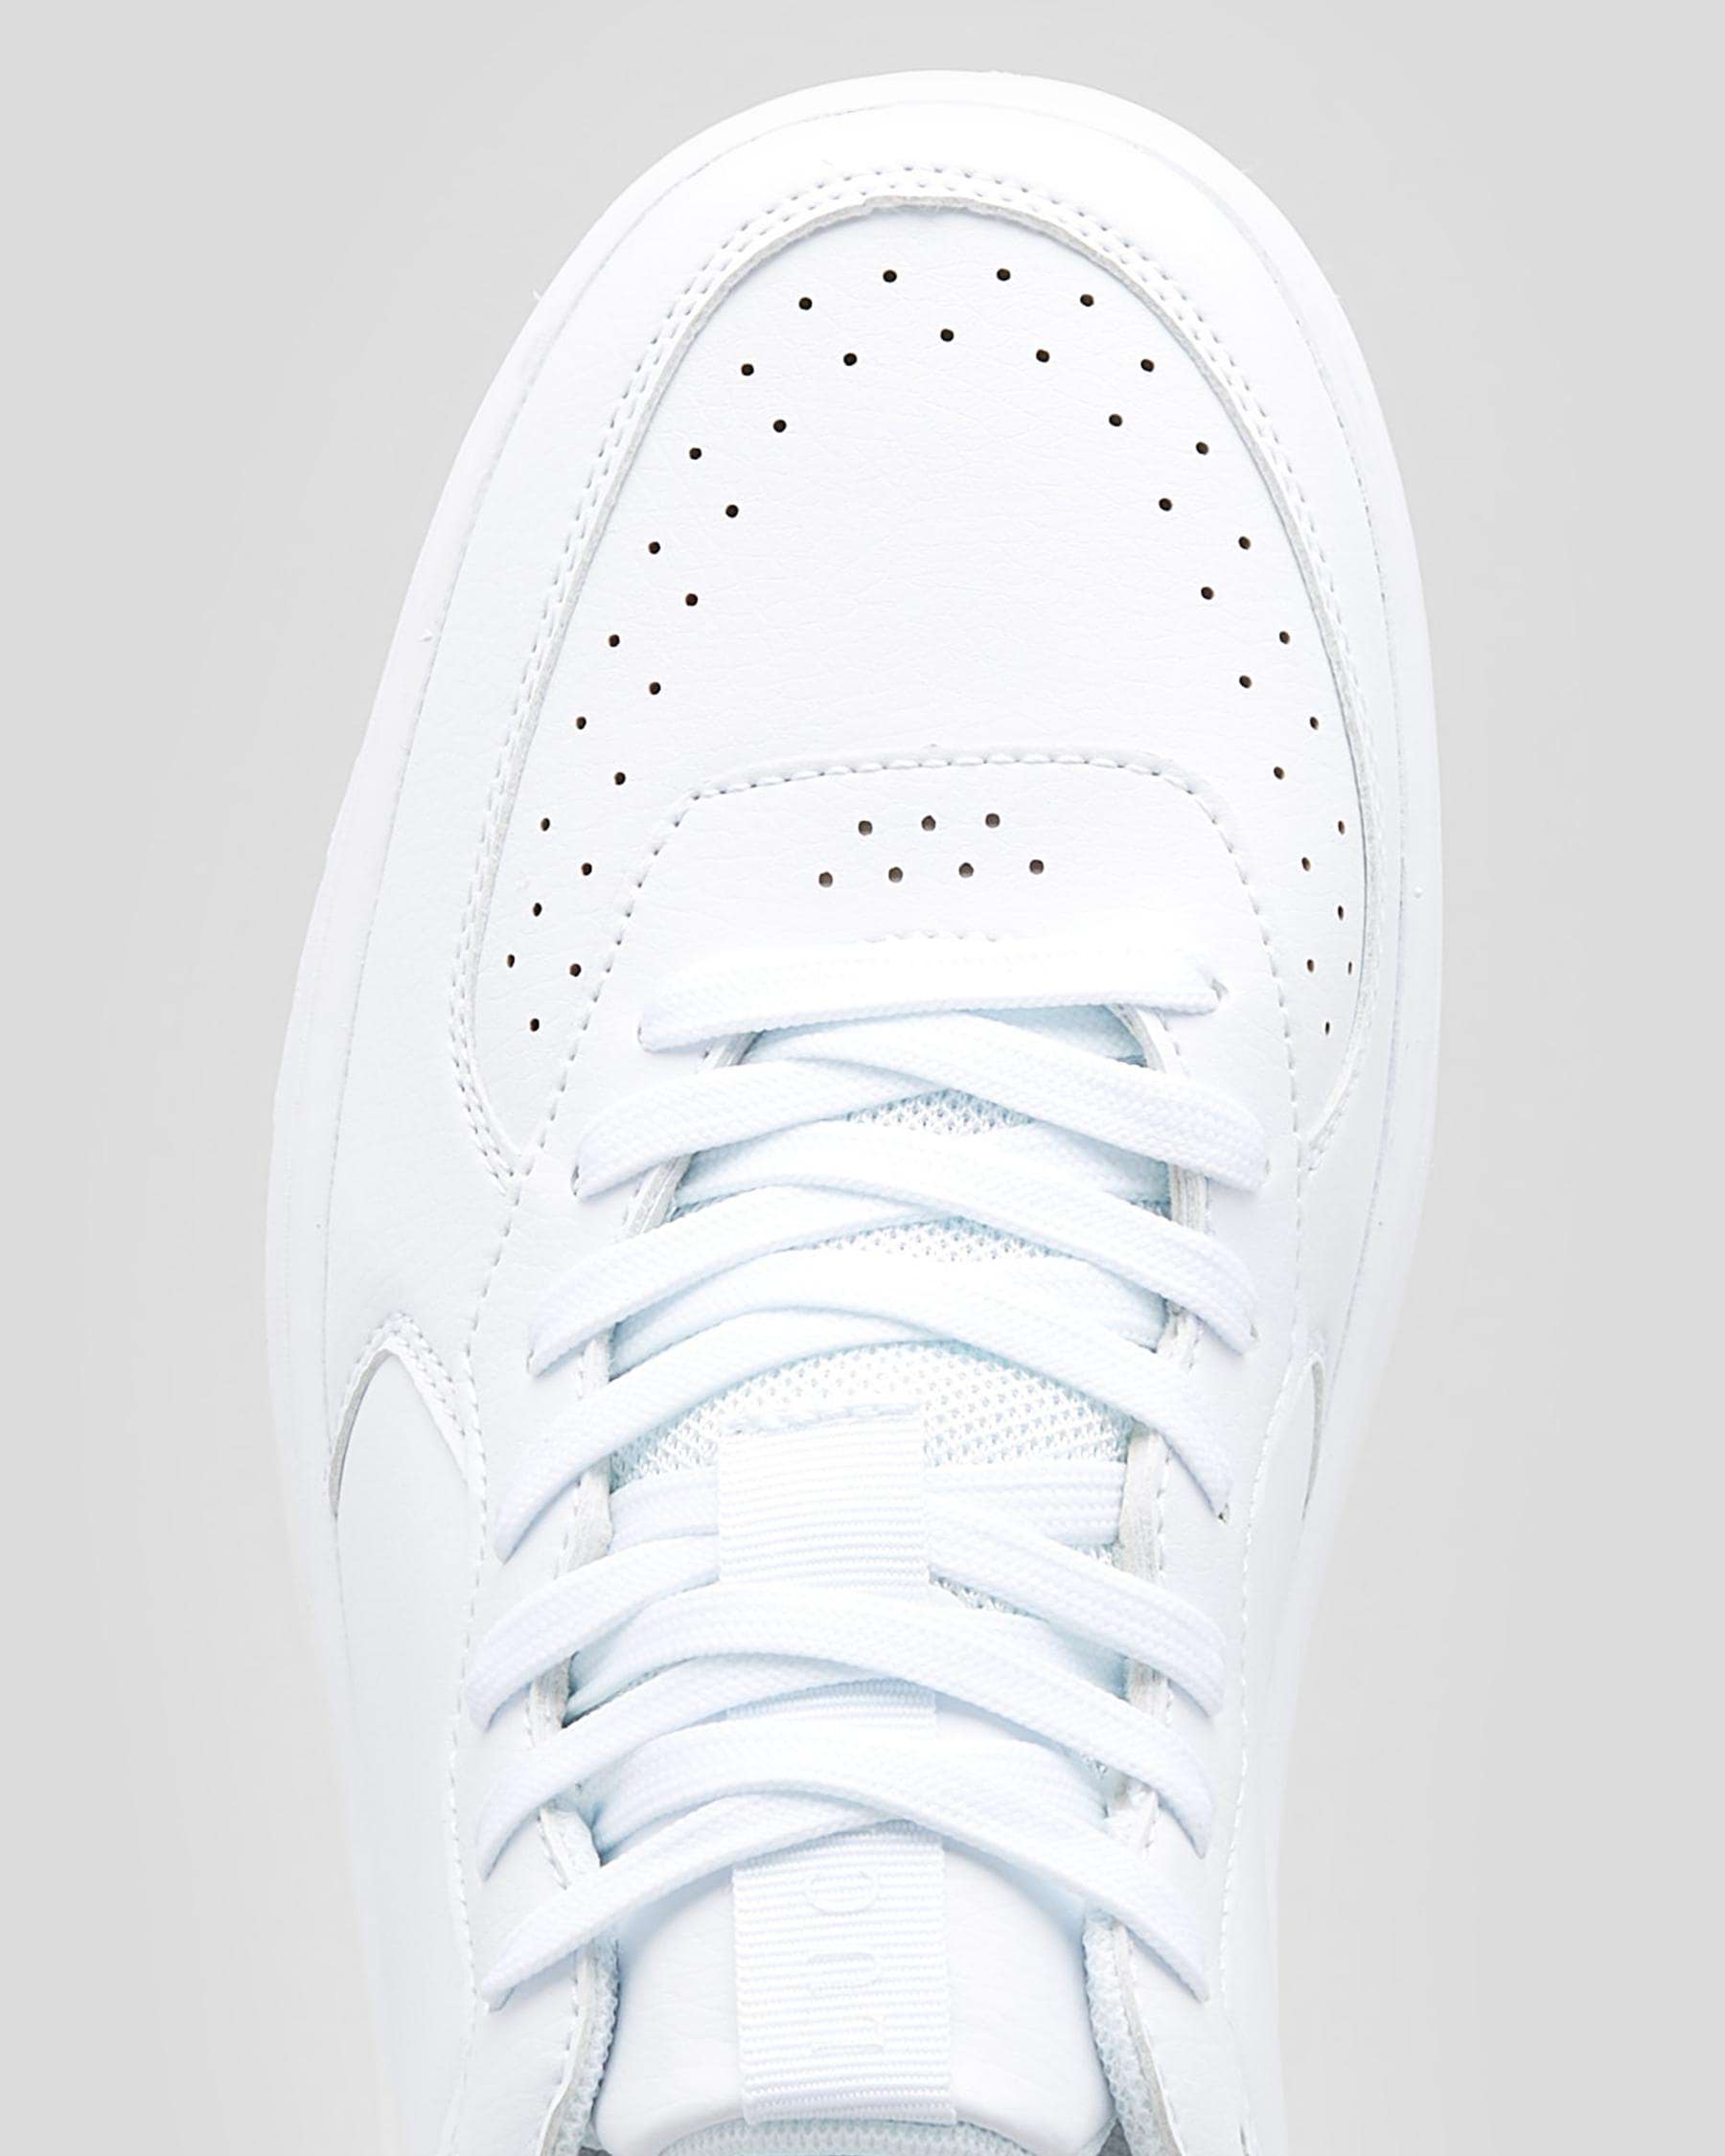 Shop Lucid Alpha Shoes In White/white - Fast Shipping & Easy Returns ...